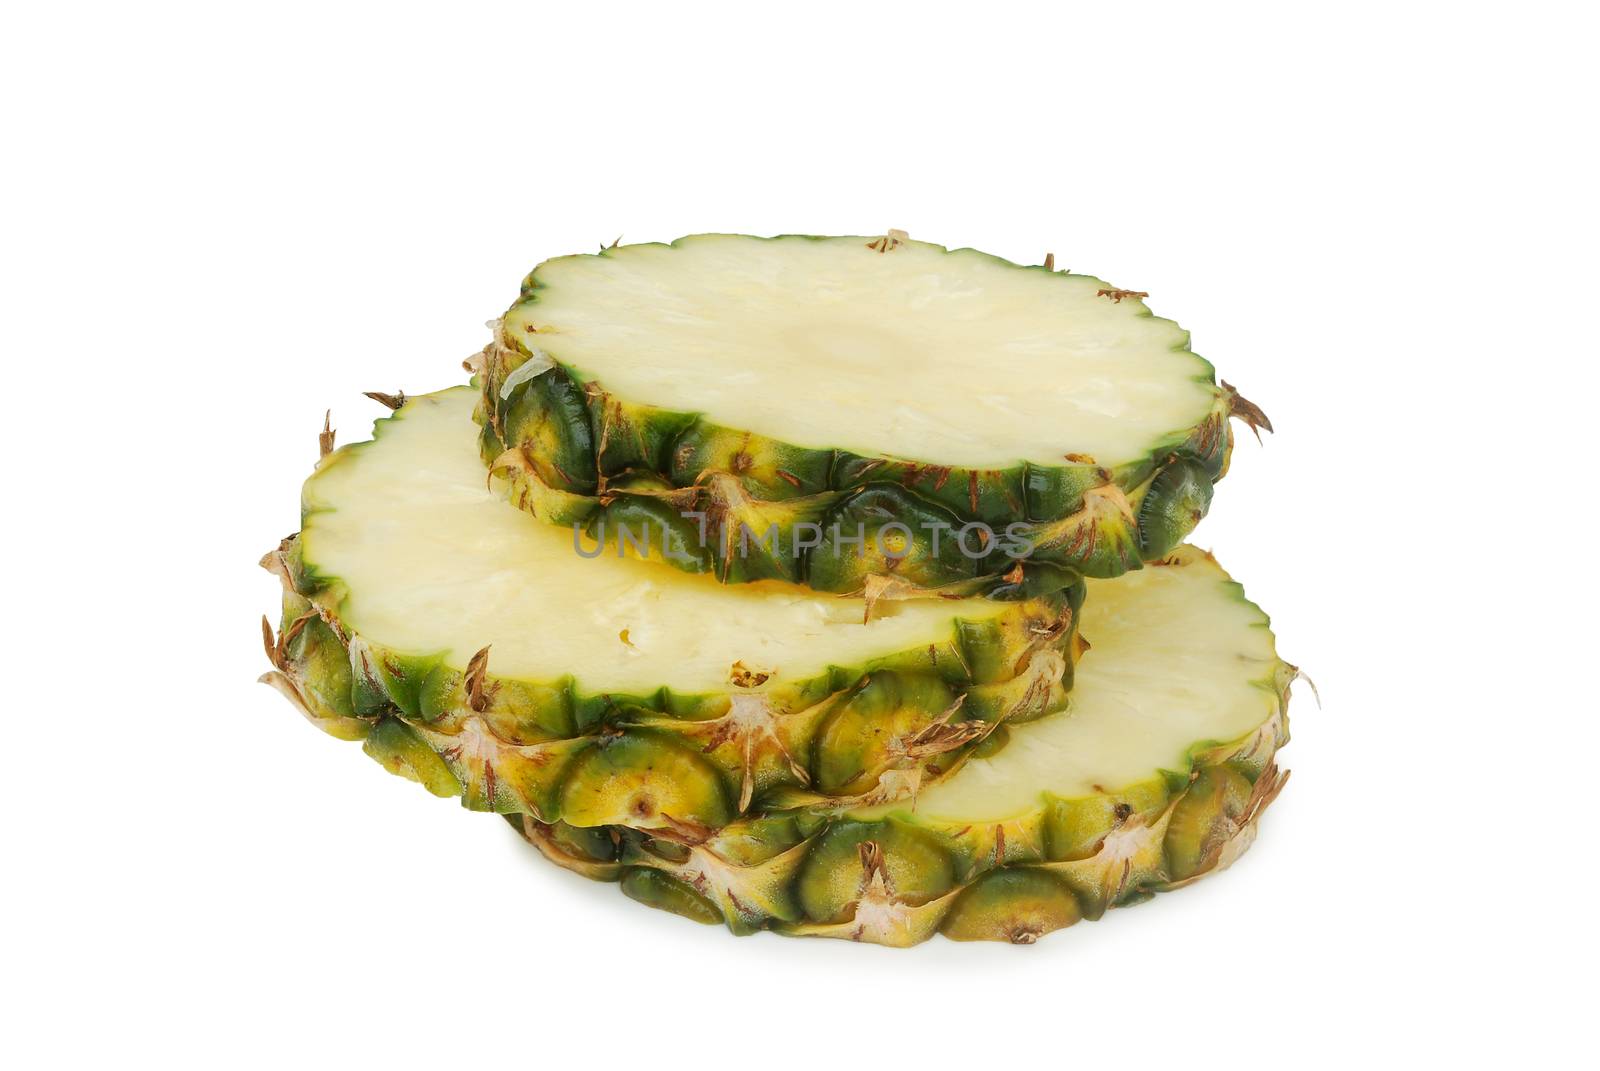 Pineapple turns into pieces.With Clipping Path.